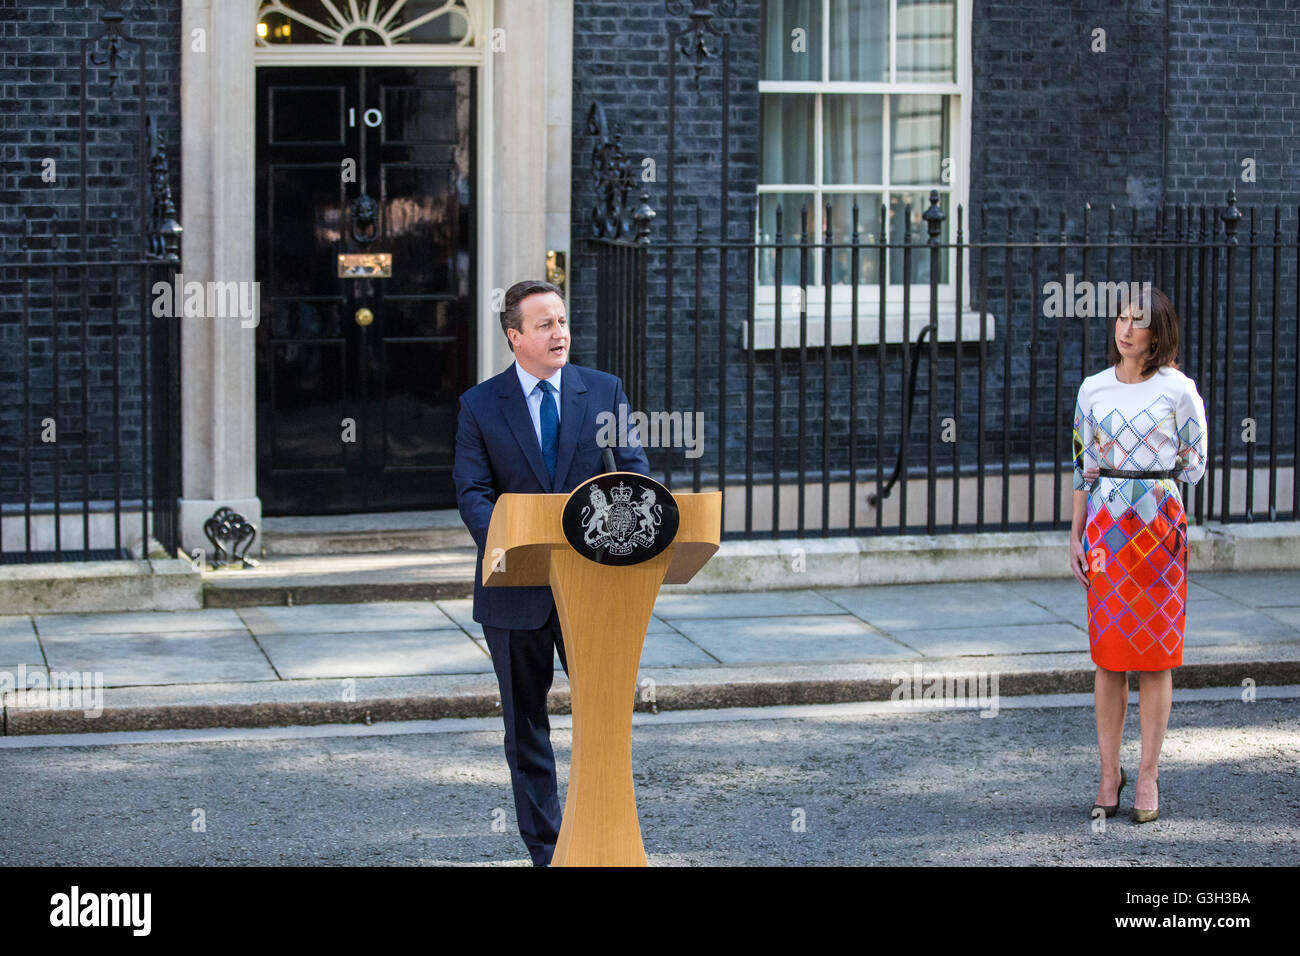 London, UK. 24th June, 2016. Prime Minister David Cameron, accompanied by his wife Samantha, announces his resignation in front of 10 Downing Street following a referendum vote in favour of the United Kingdom leaving the European Union. Credit:  Mark Kerrison/Alamy Live News Stock Photo